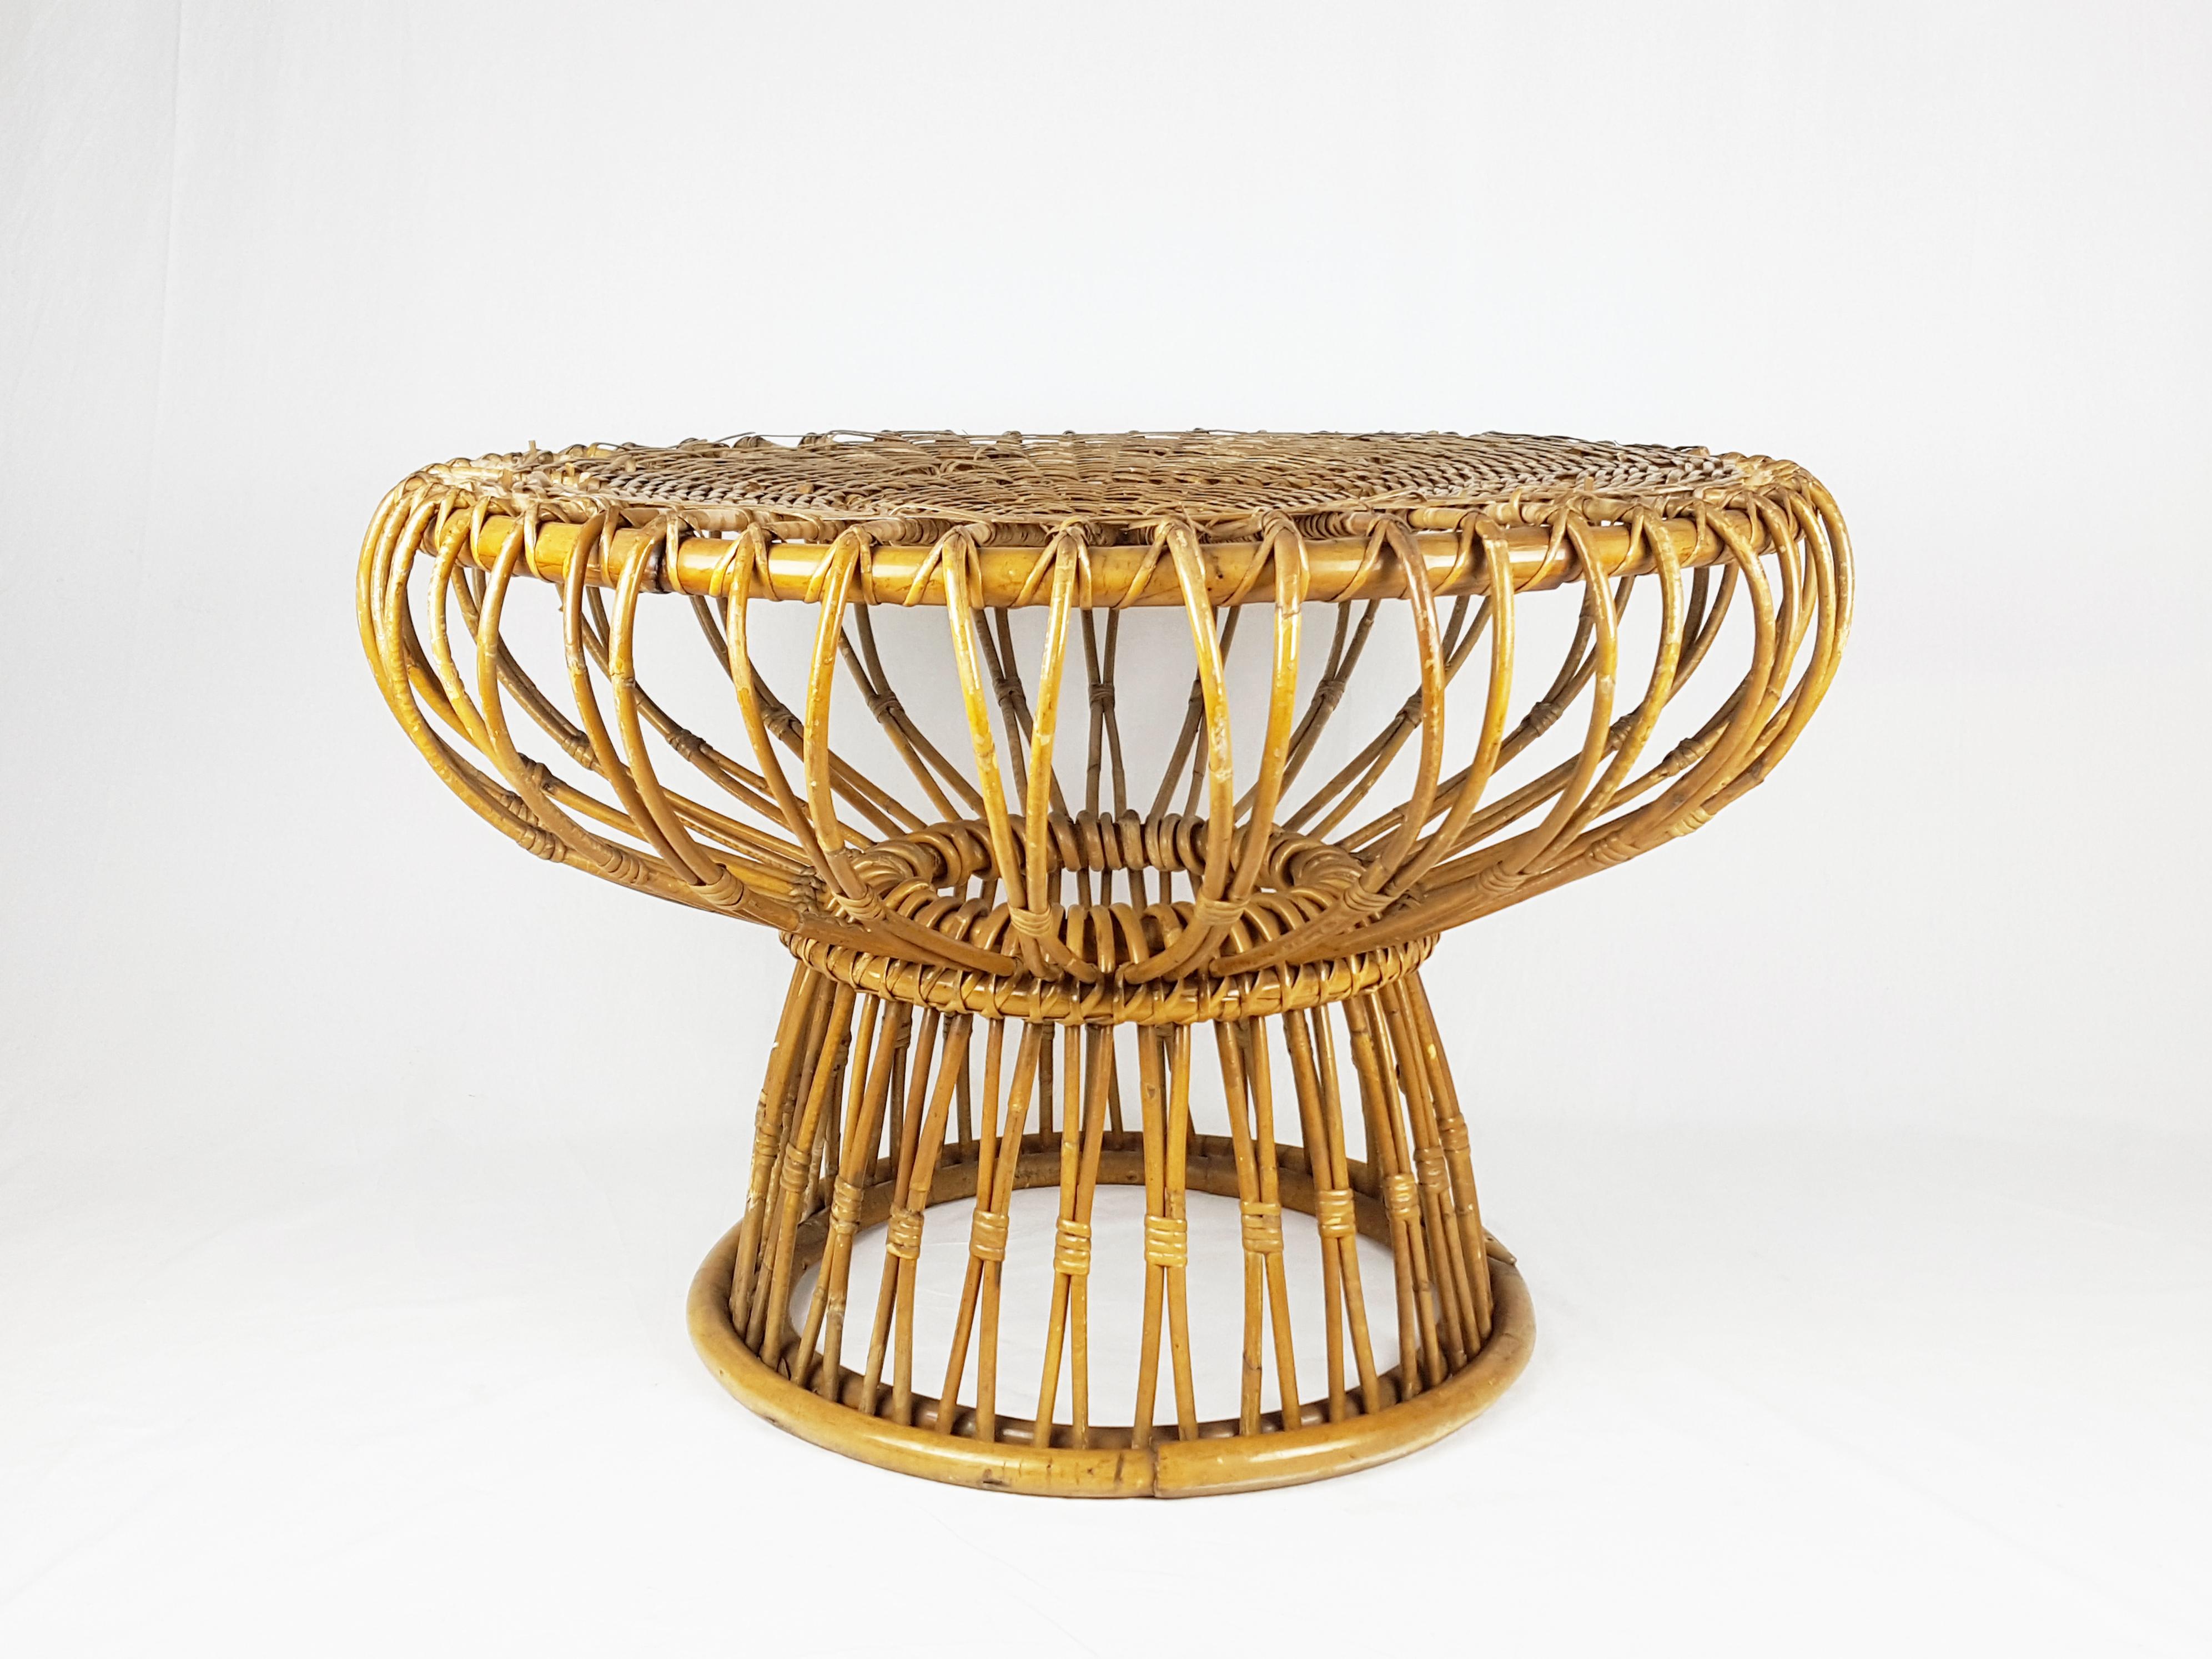 Rush and Rattan Midcentury Round Coffee Table by Franca Helg for Bonacina, 1955 For Sale 3